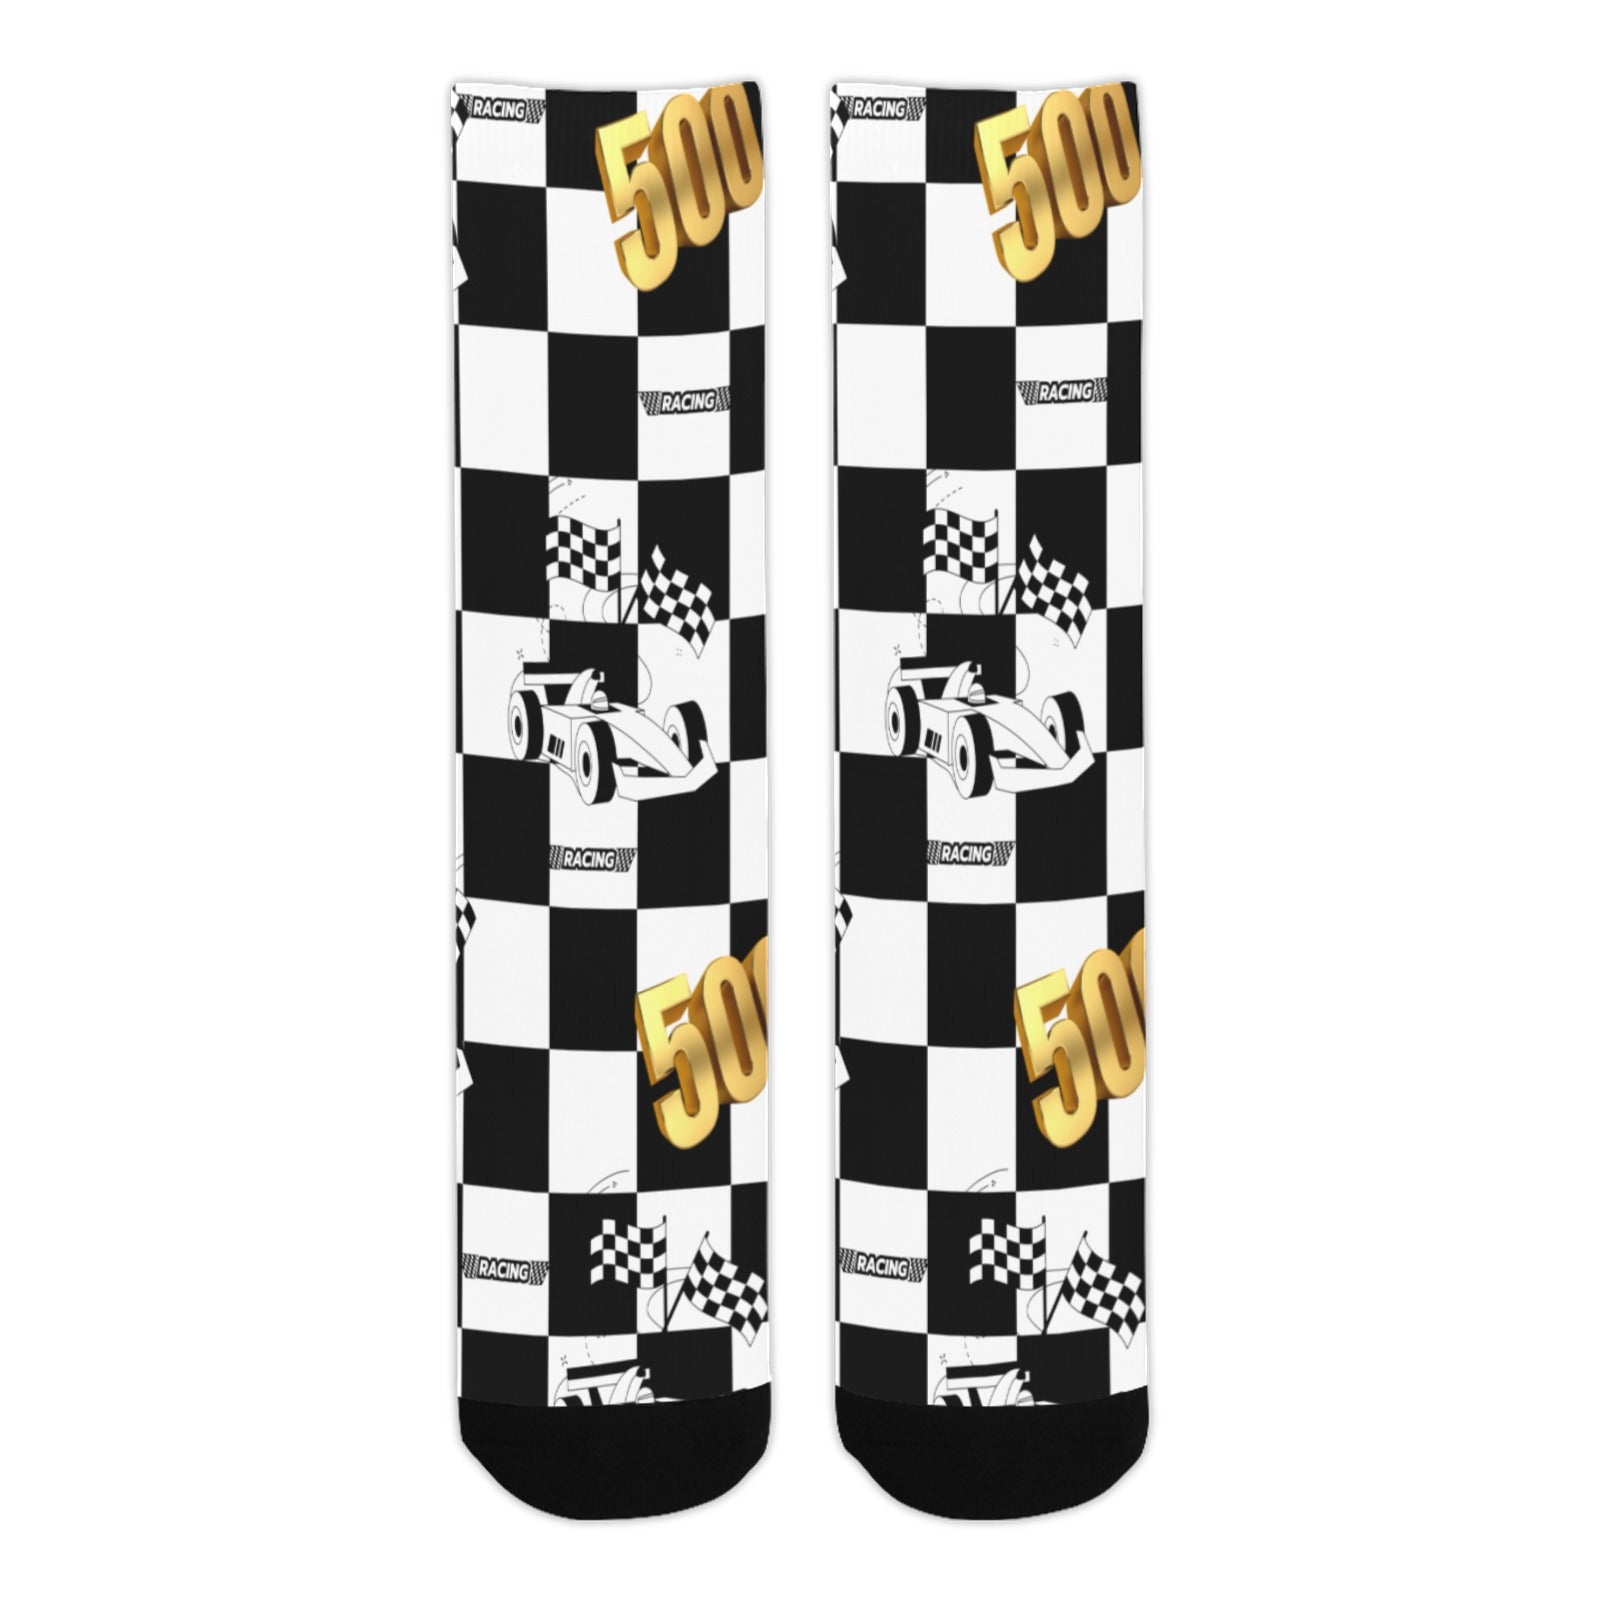 Indy 500 Crew Socks - Ships from The USA - Socks at TFC&H Co.